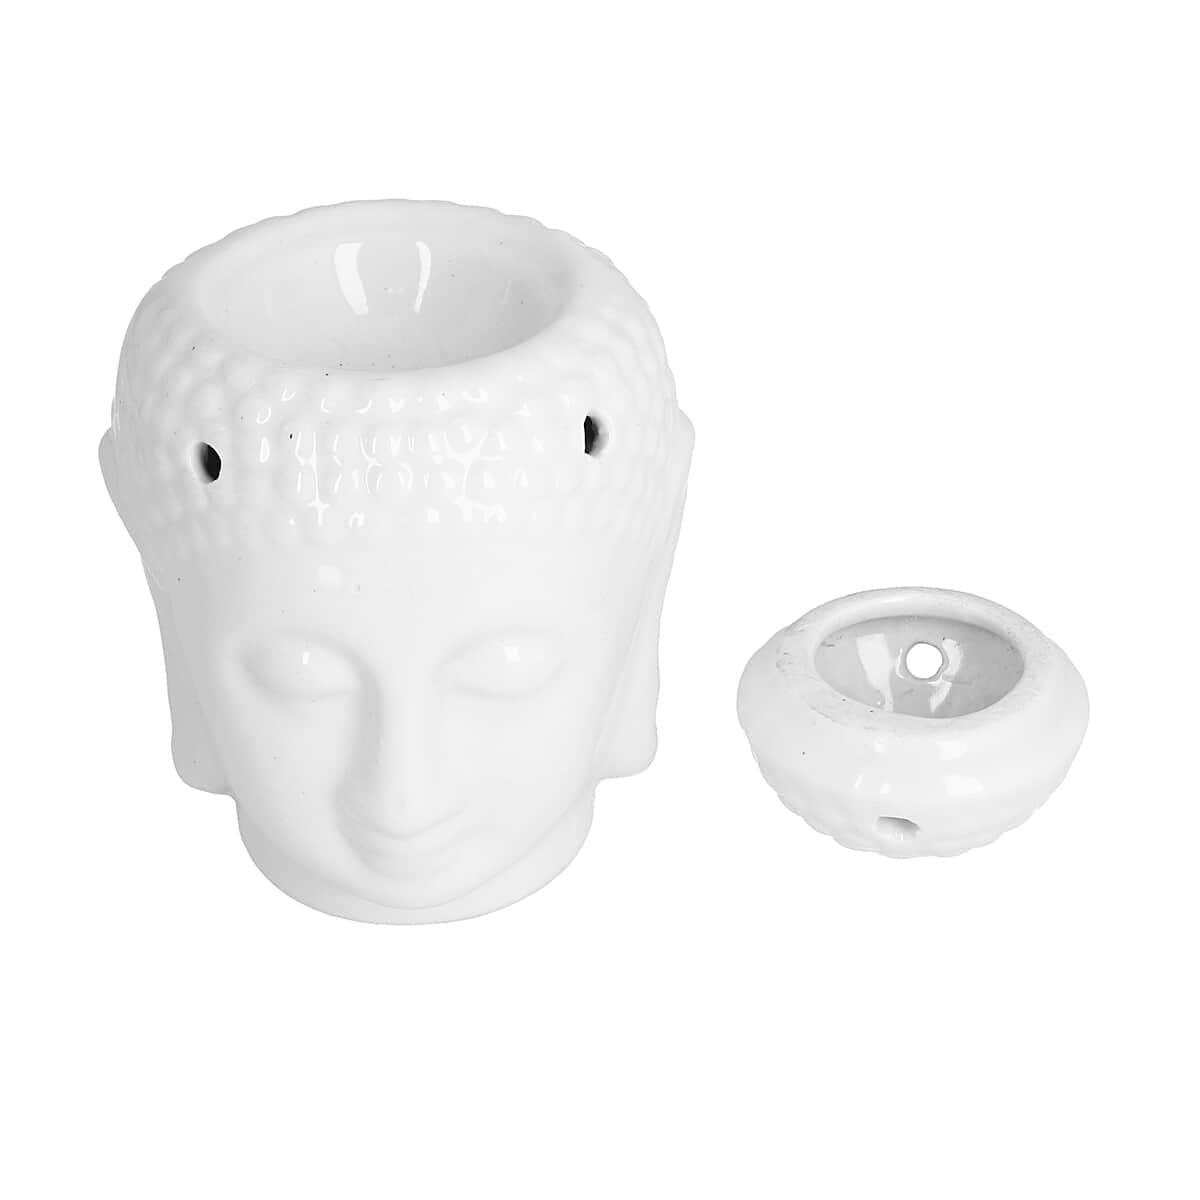 White Ceramic Buddha Head Tealight Candle Holder with Aromatherapy Oil Burner image number 5